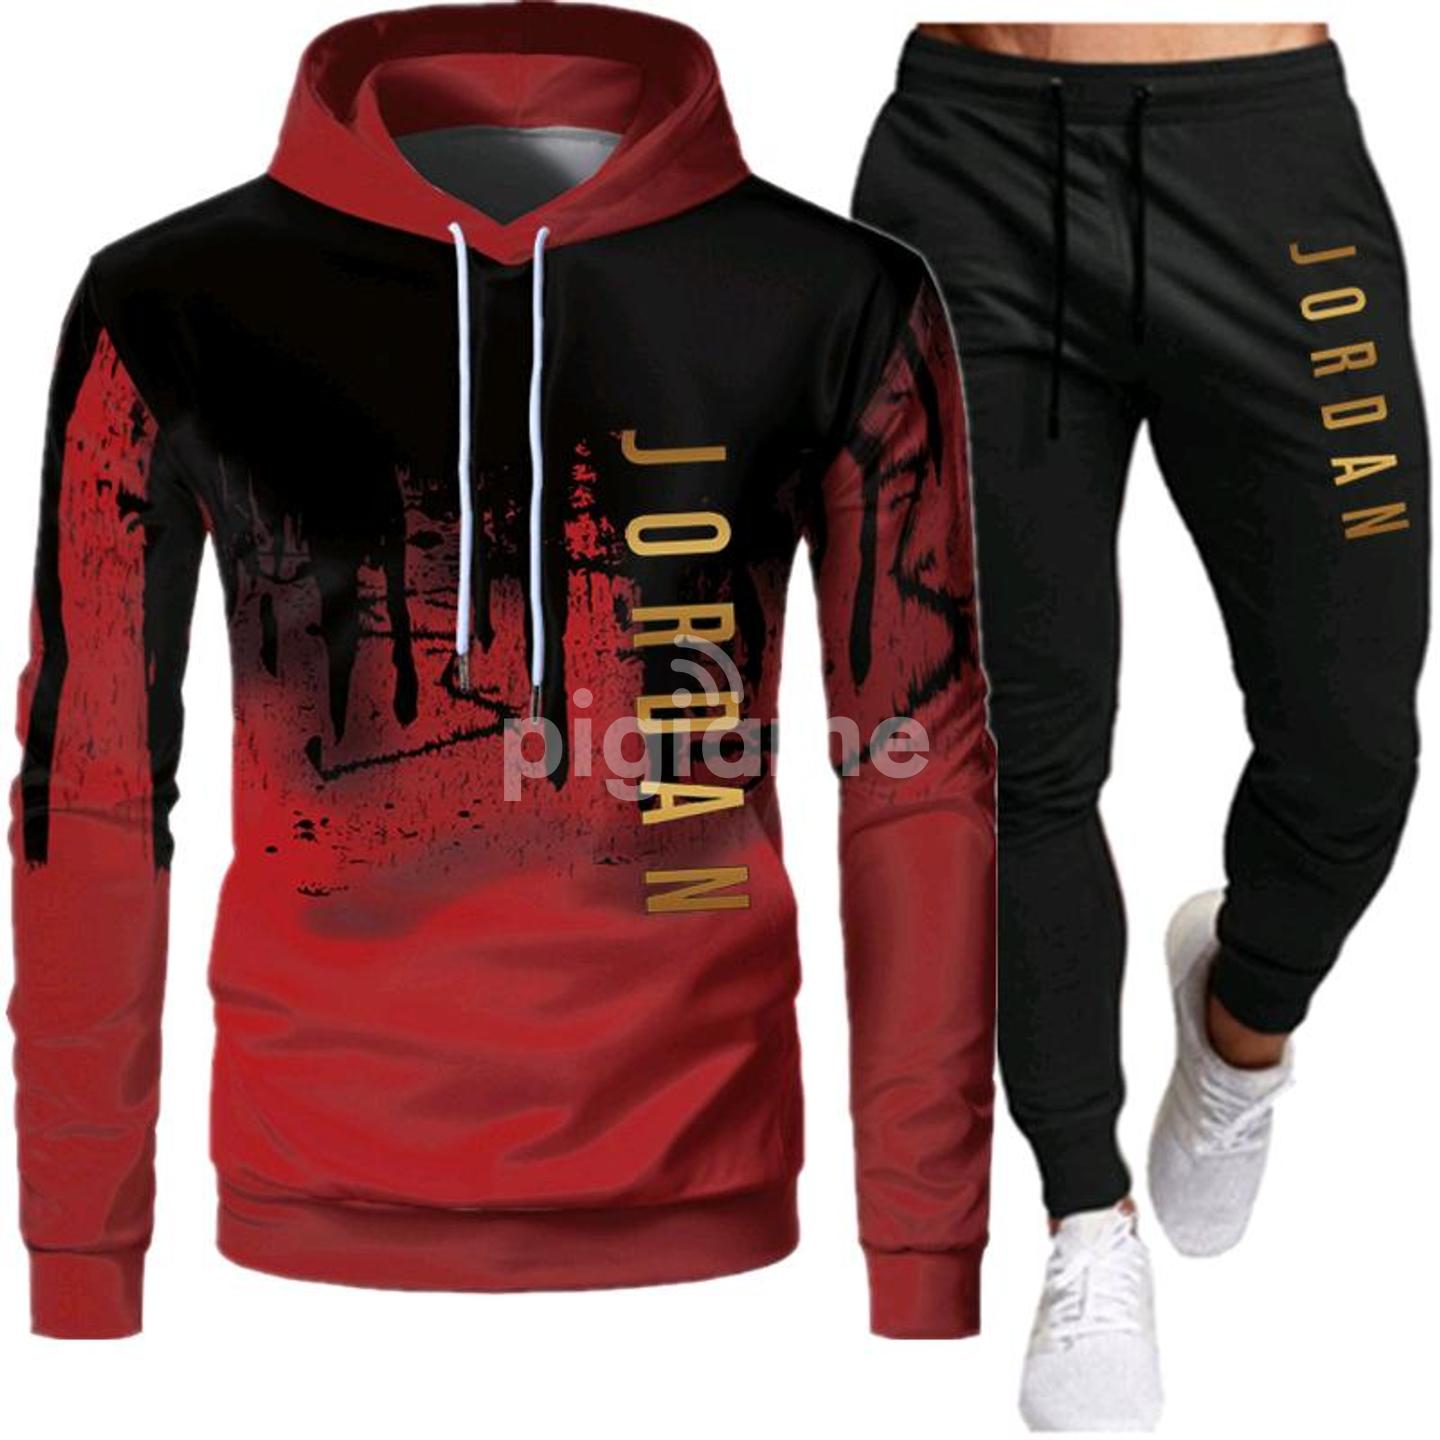 MK clothes - Adults Jordan tracksuits £20 Limited sizes... | Facebook